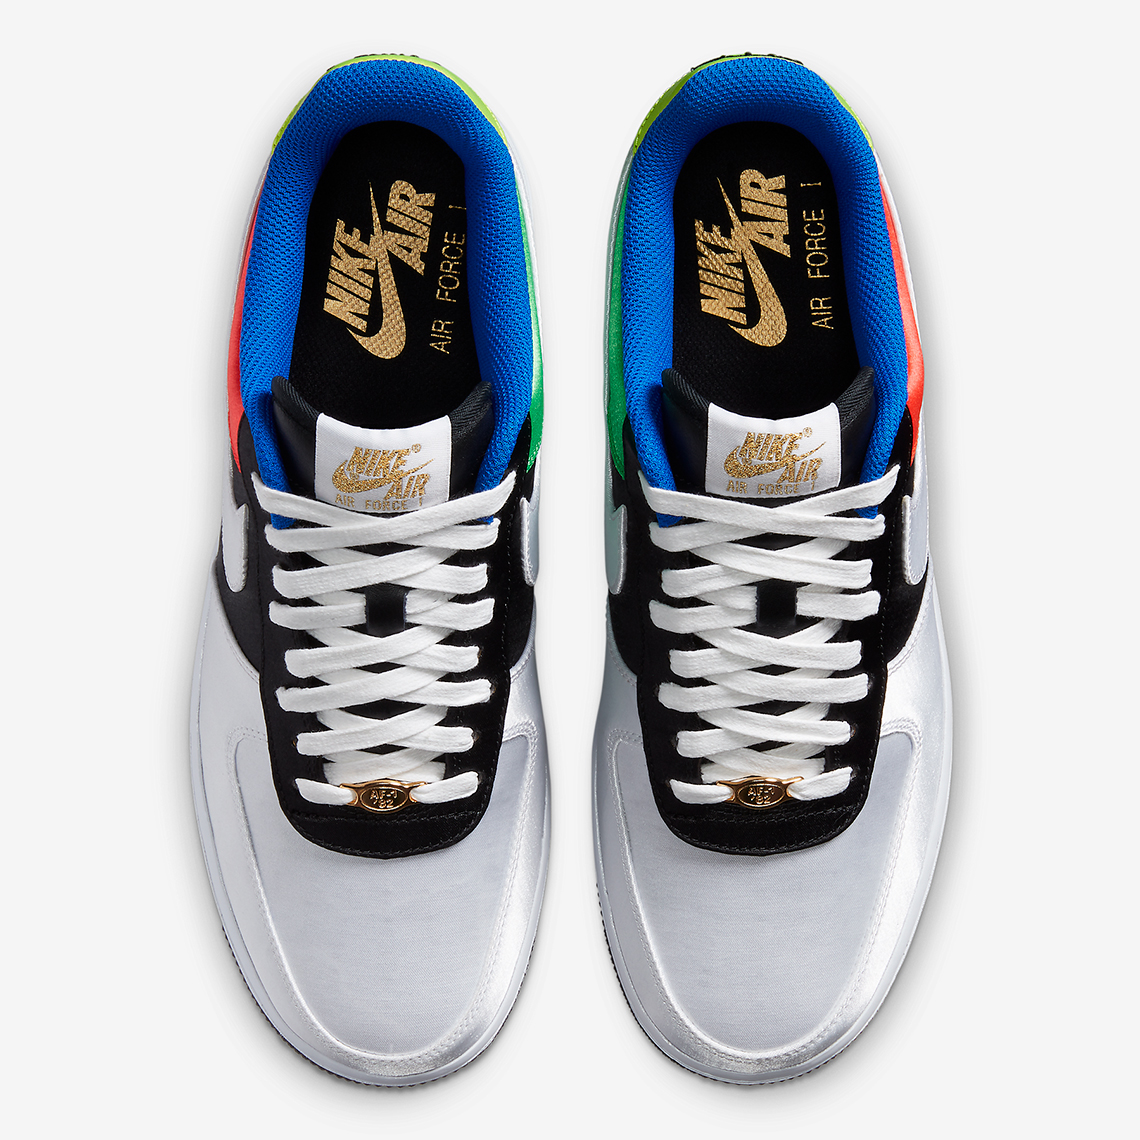 air force 1 olympic 2020